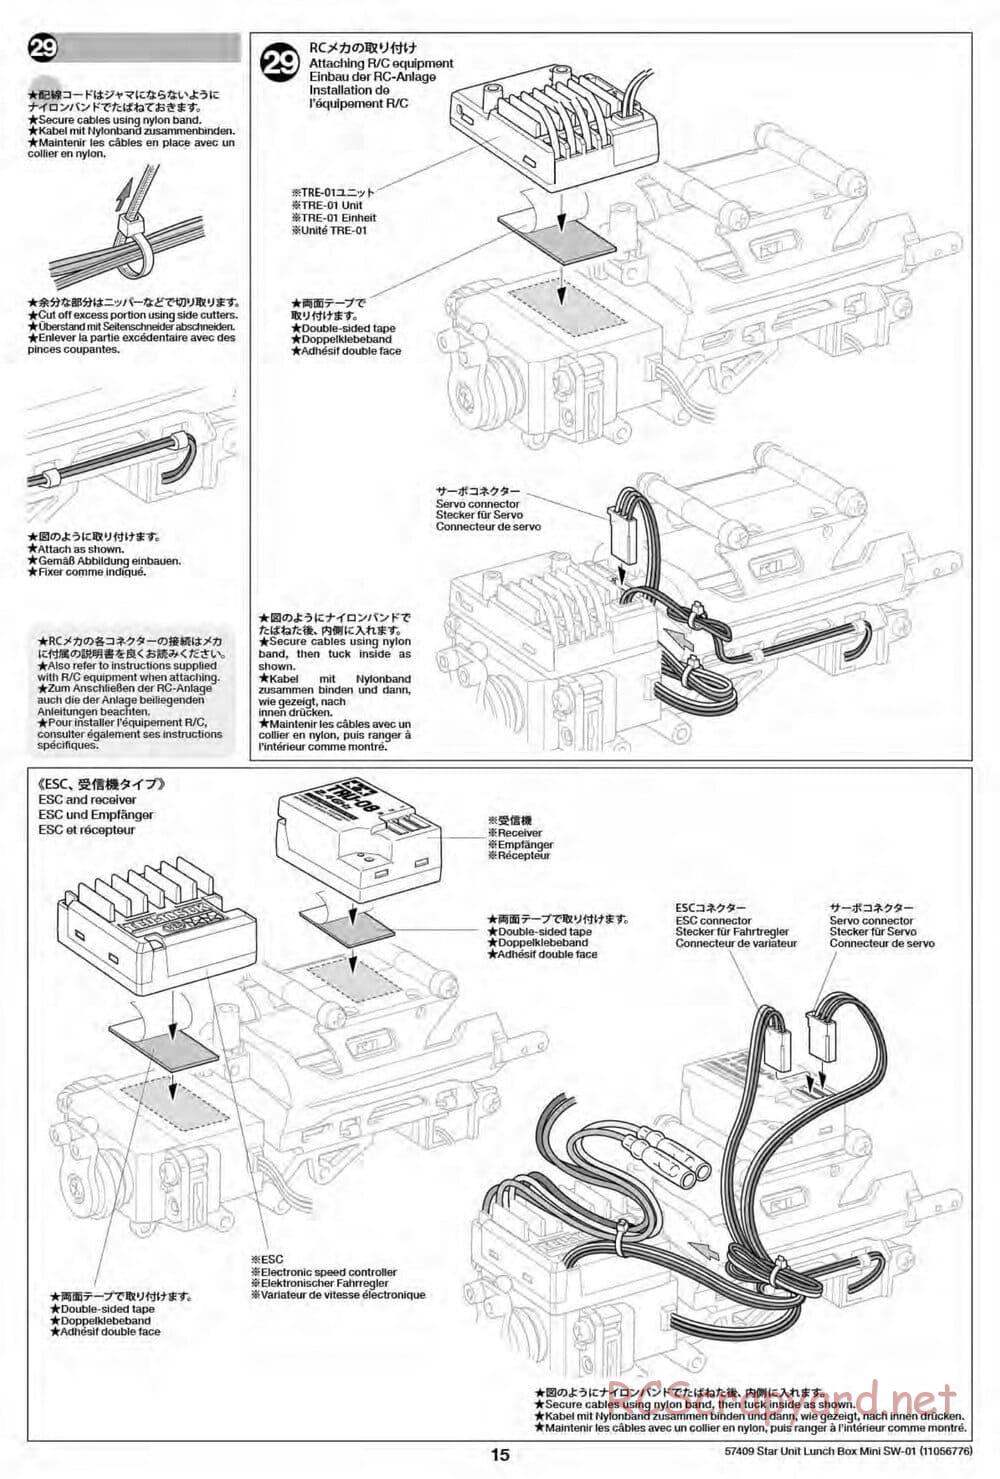 Tamiya - Lunch Box Mini - SW-01 Chassis - Manual - Page 15